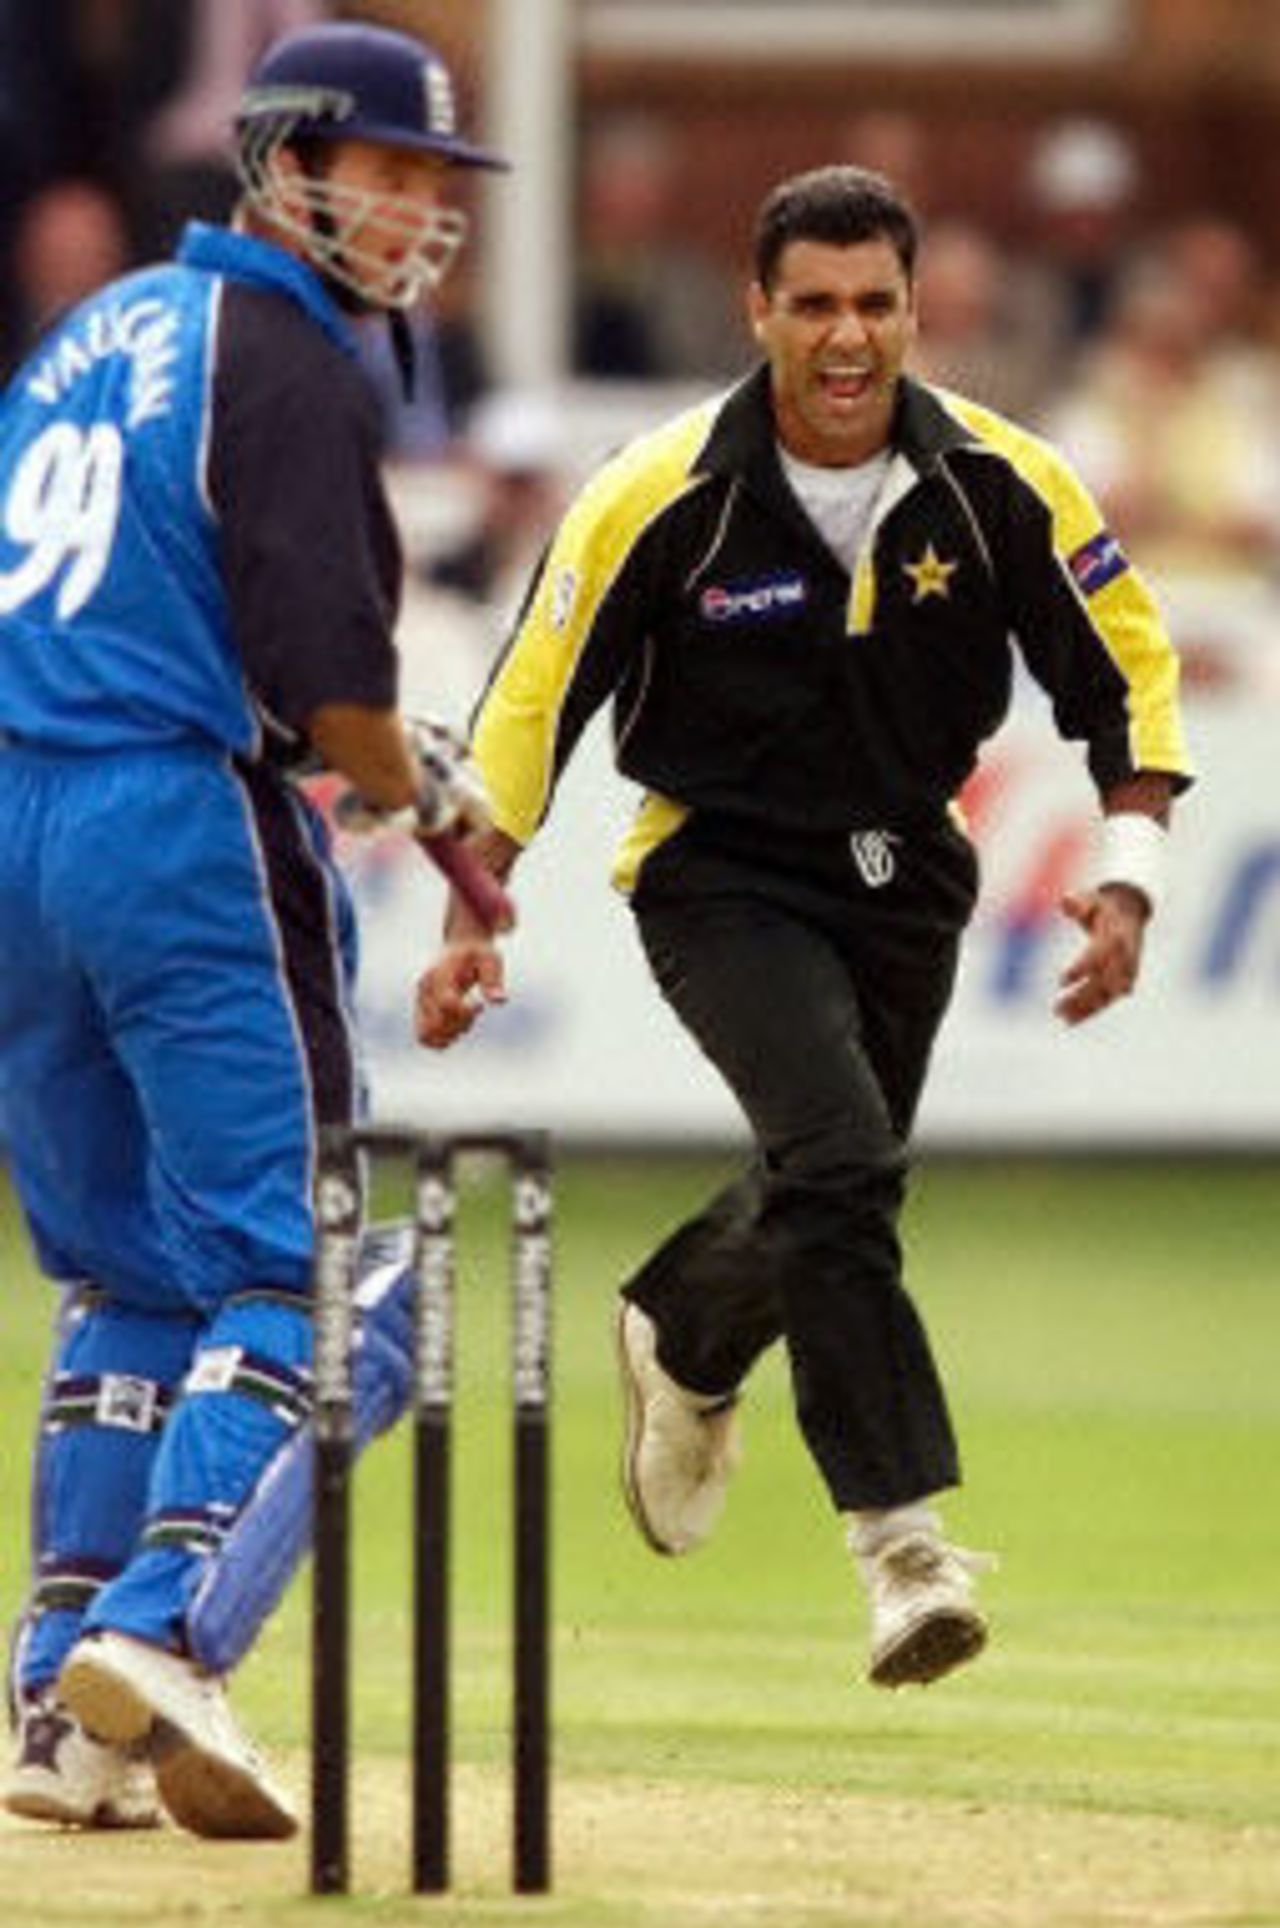 Waqar Younis celebrates the wicket of Vaughan, 4th ODI at Lords, 12 June 2001.